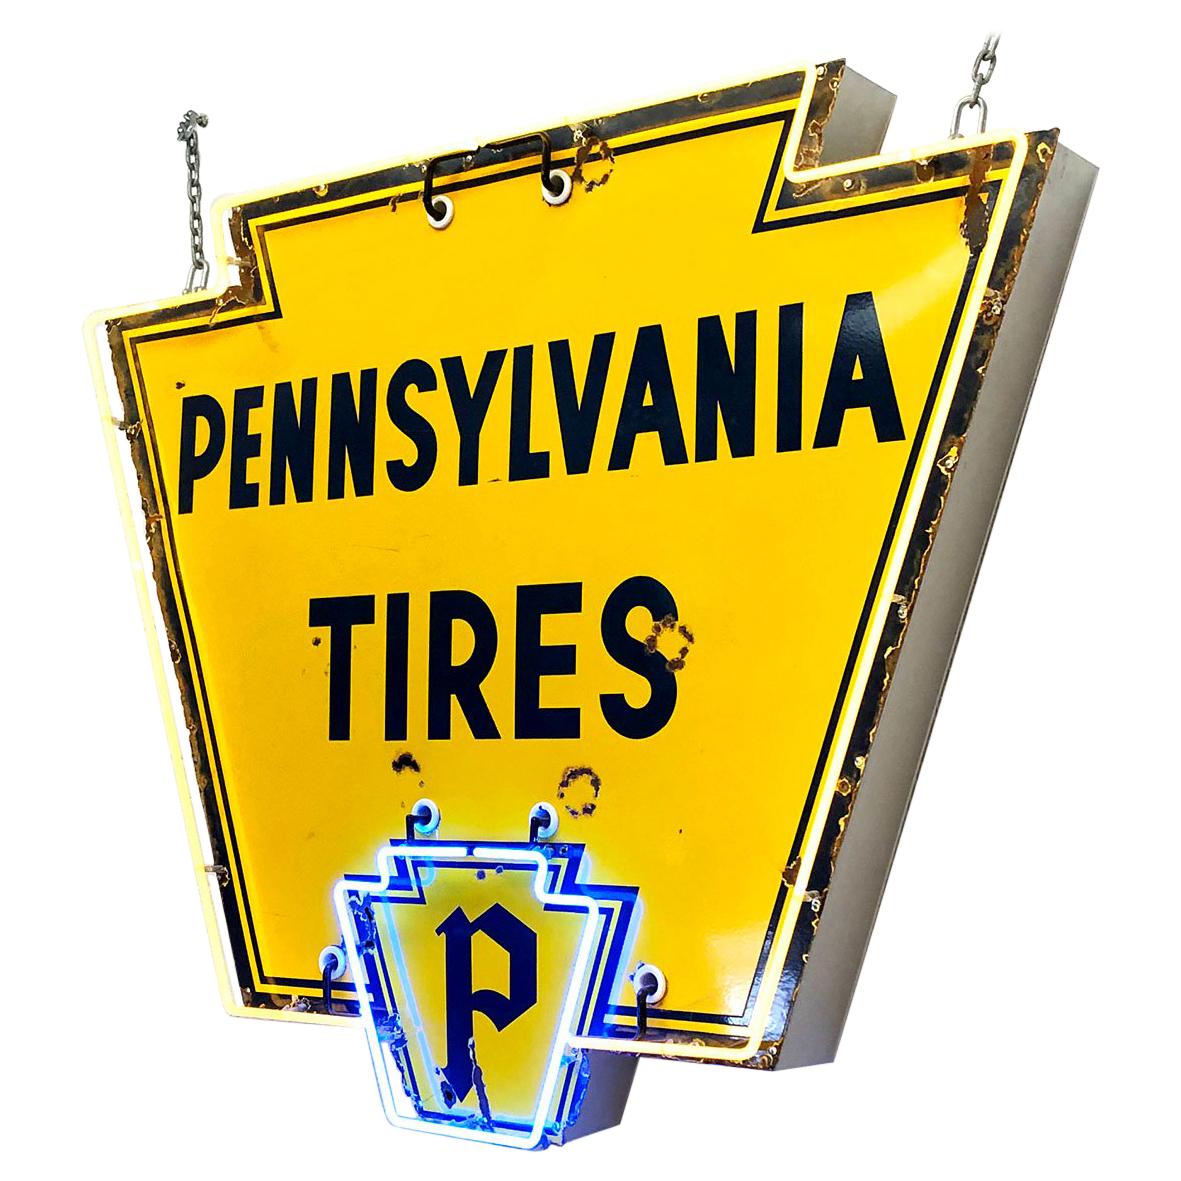 Vintage 1950s Neon 'Pennsylvania Tires' Sign For Sale